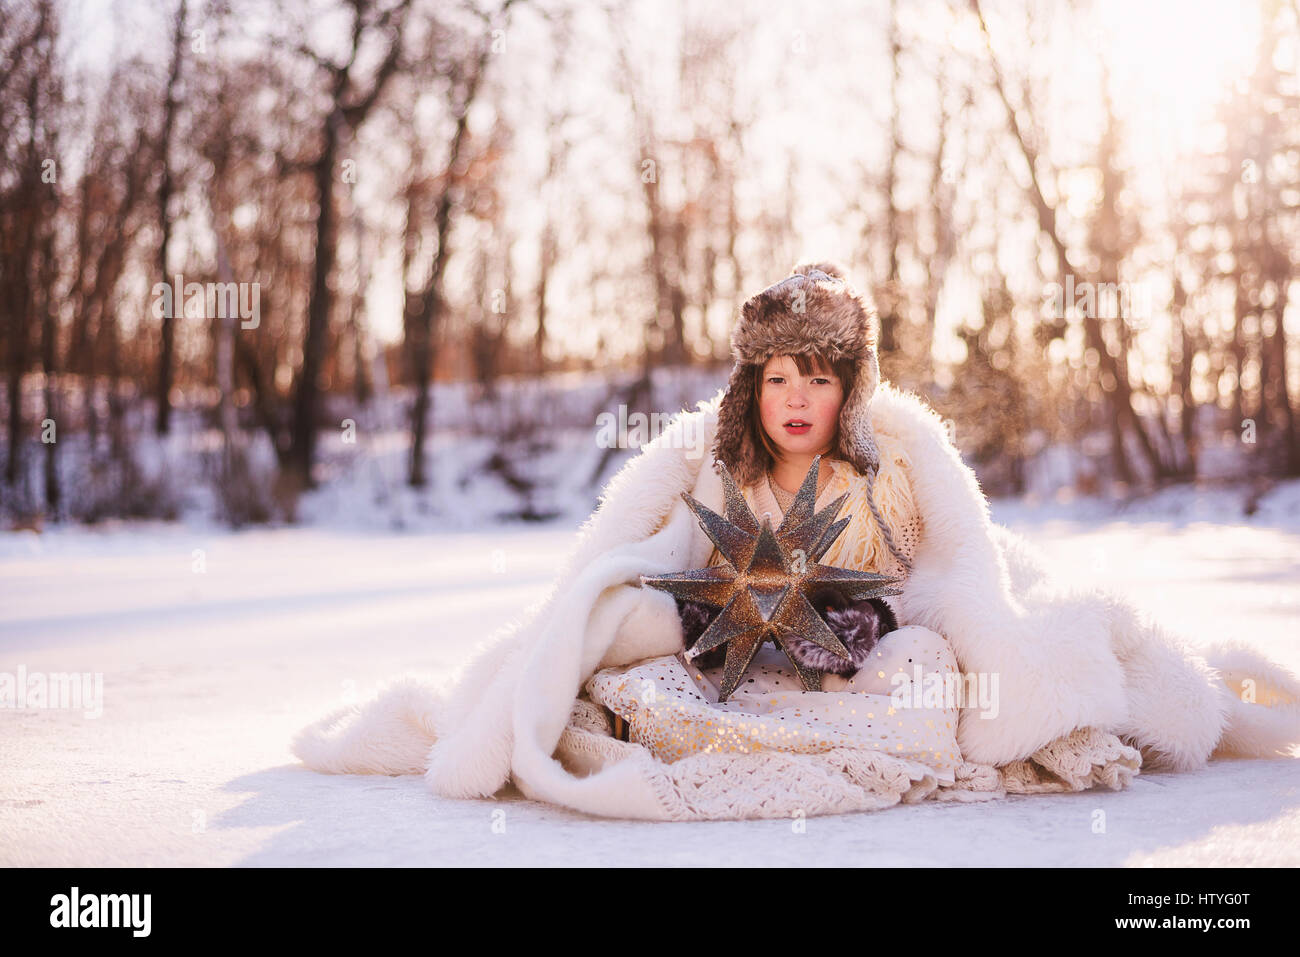 Girl dressed as snow queen sitting in the snow Stock Photo